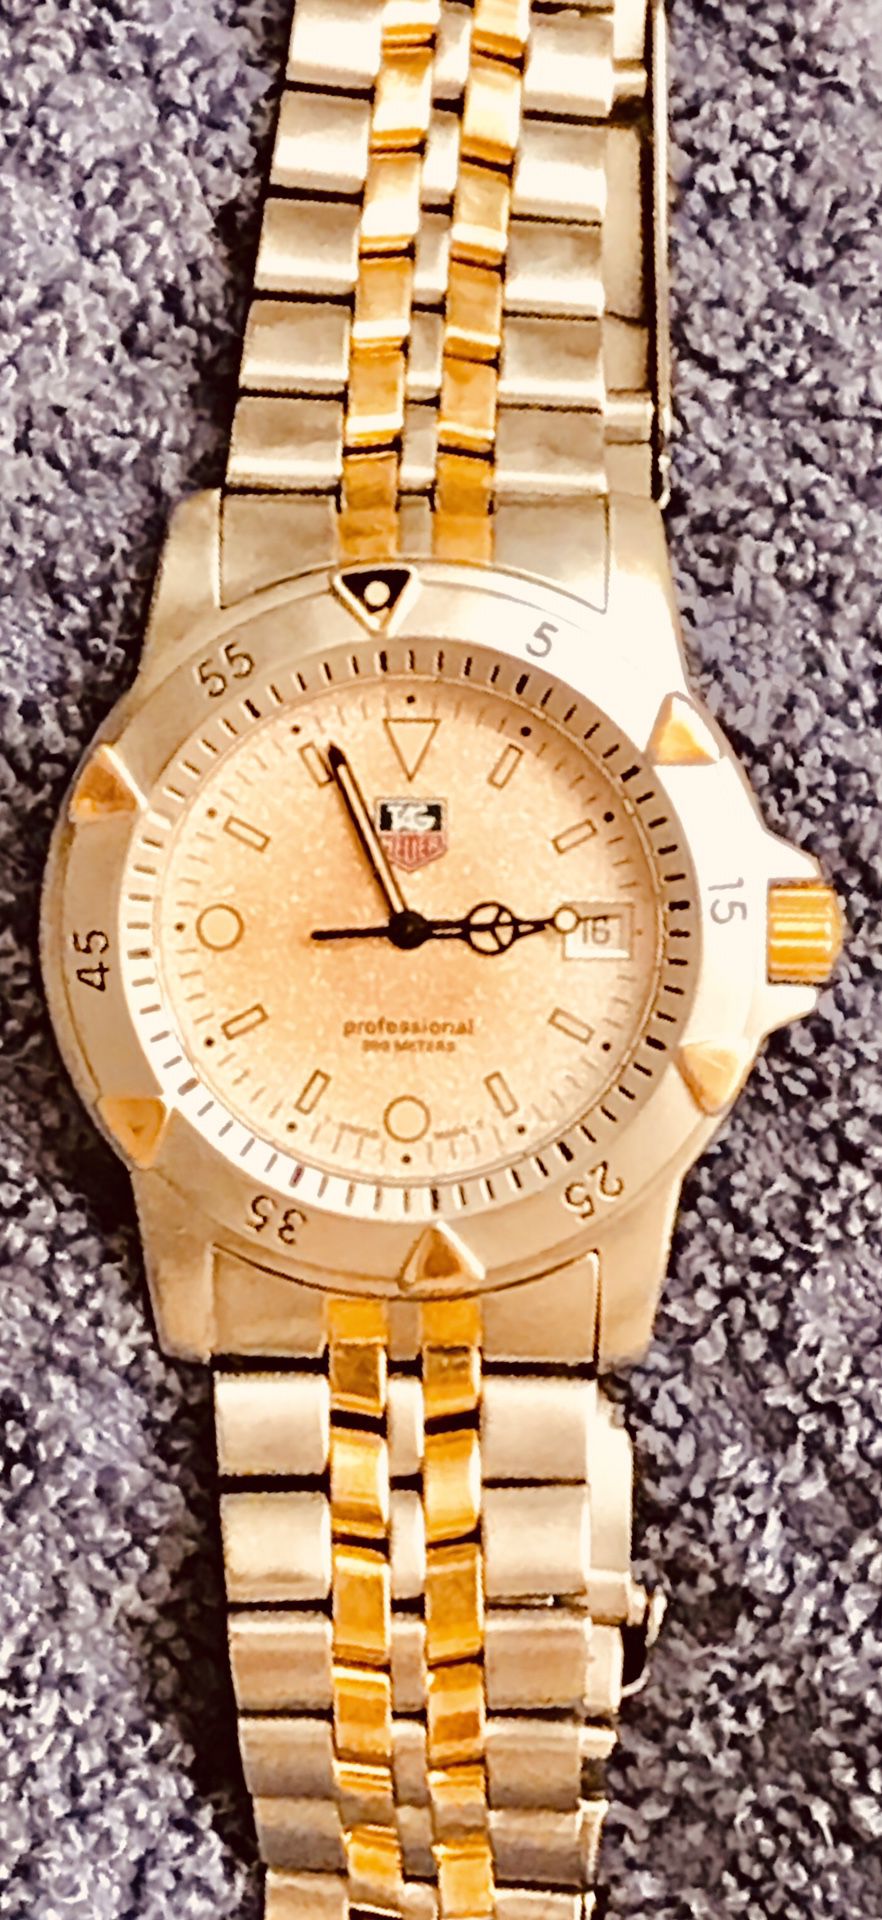 Tag Heuer "Professional" DIVERS' watch, gold and stainless steel.